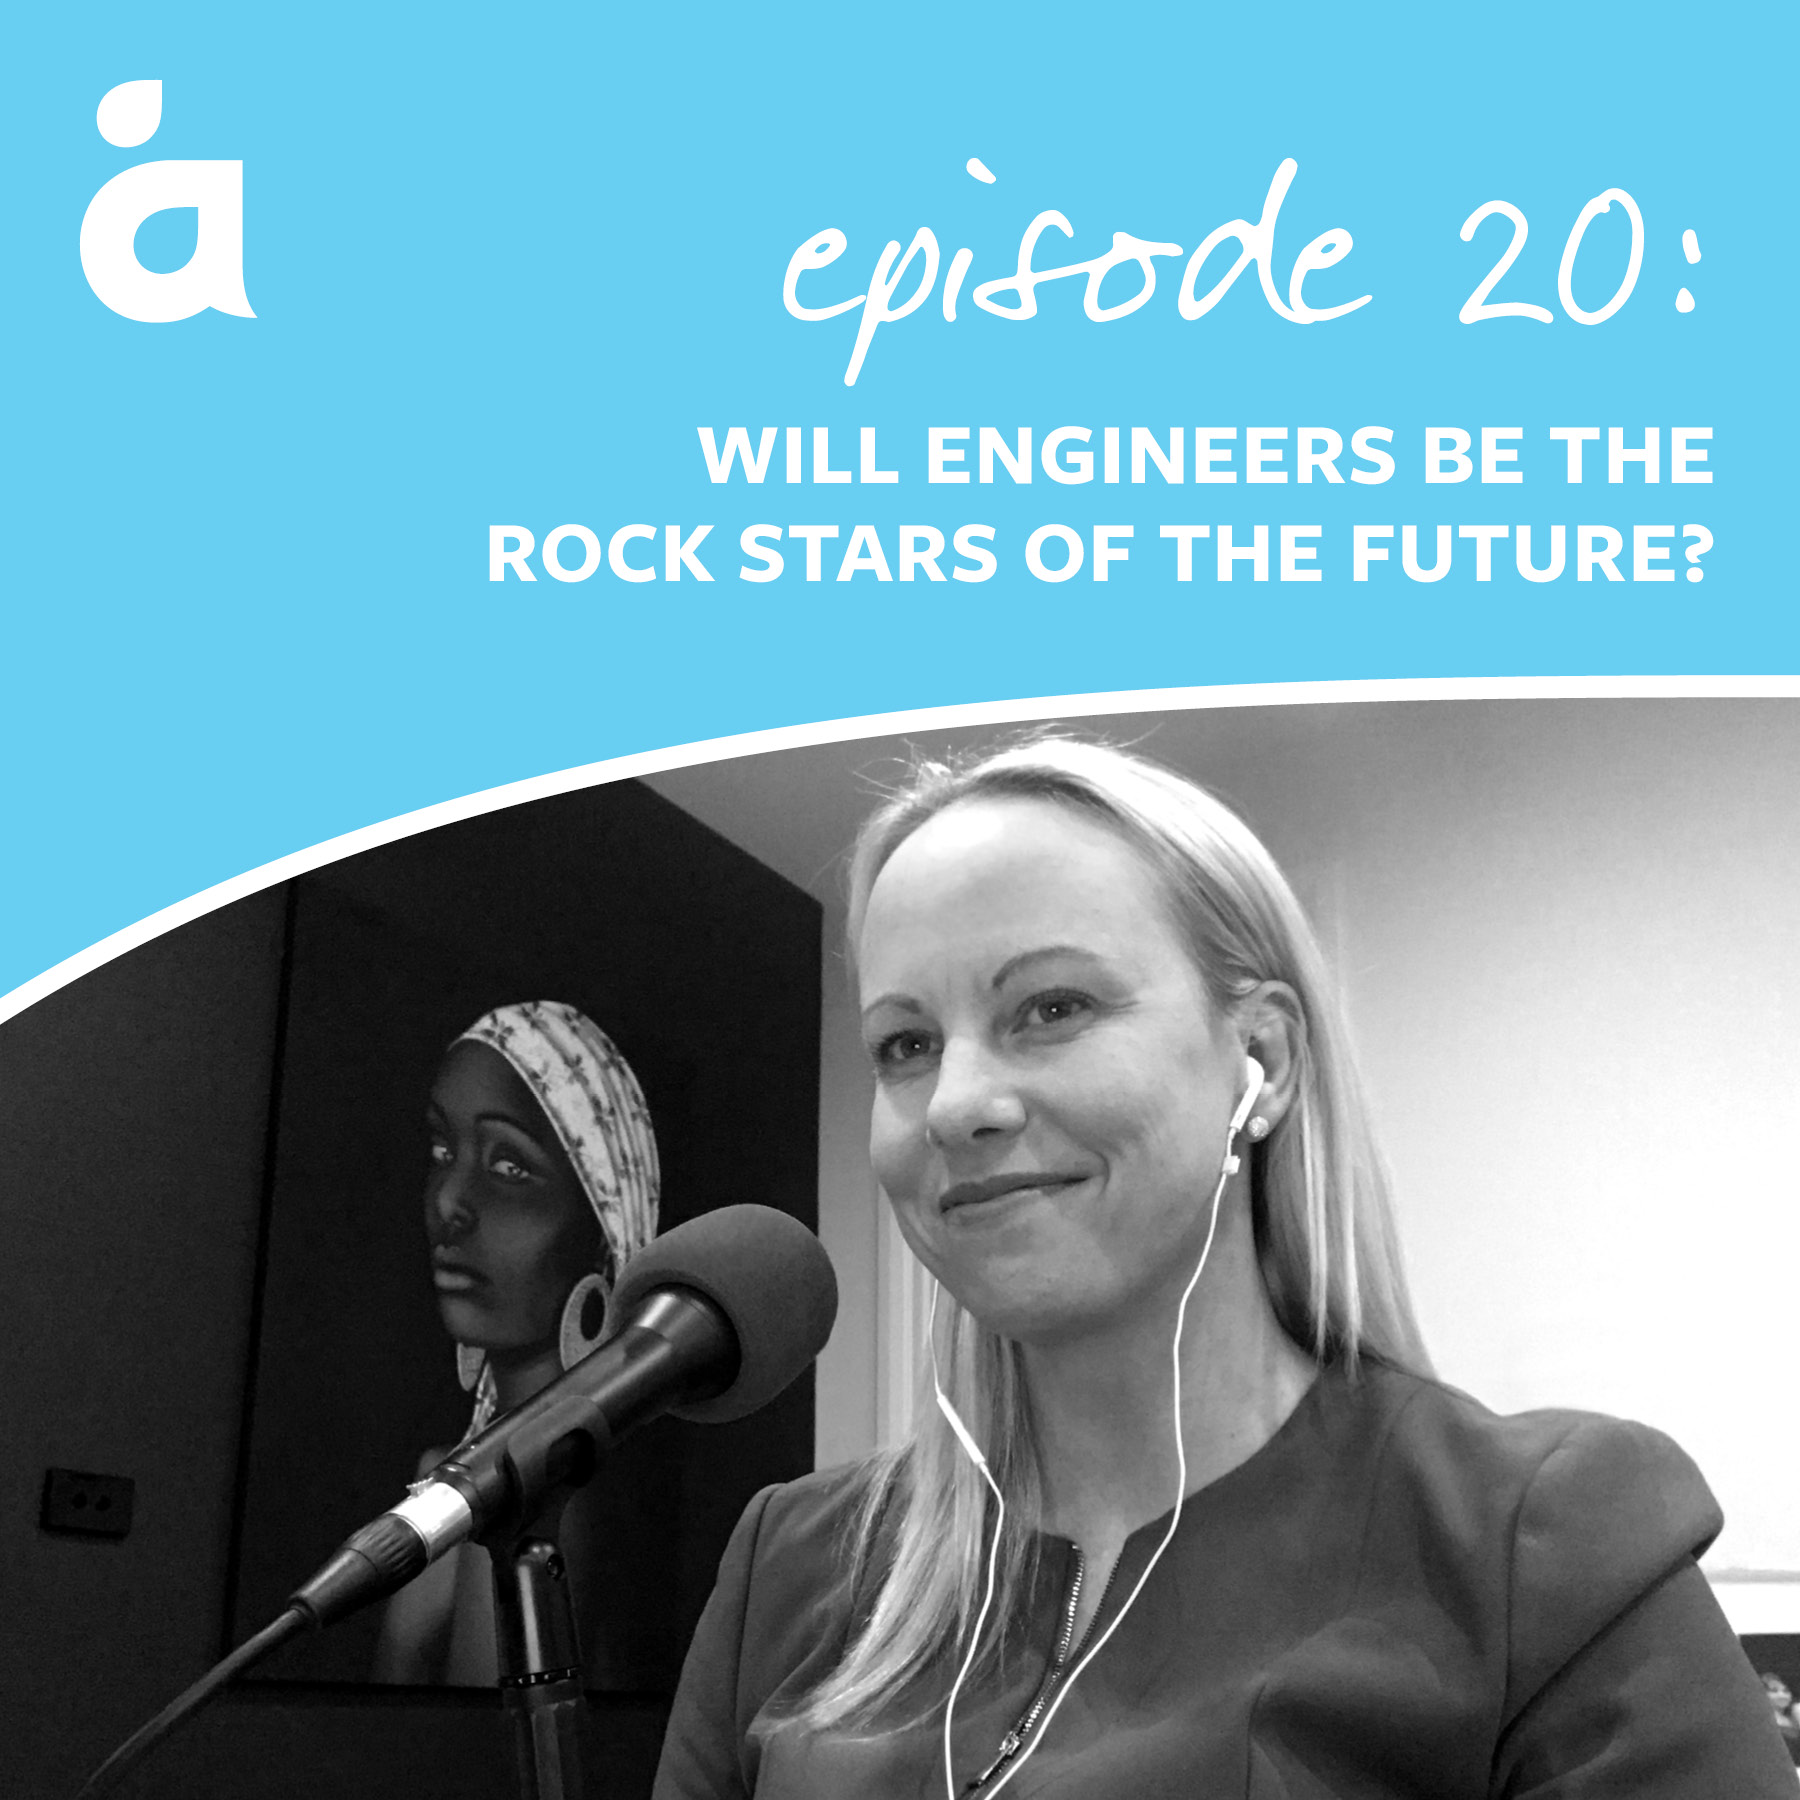 Will engineers be the rock stars of the future?